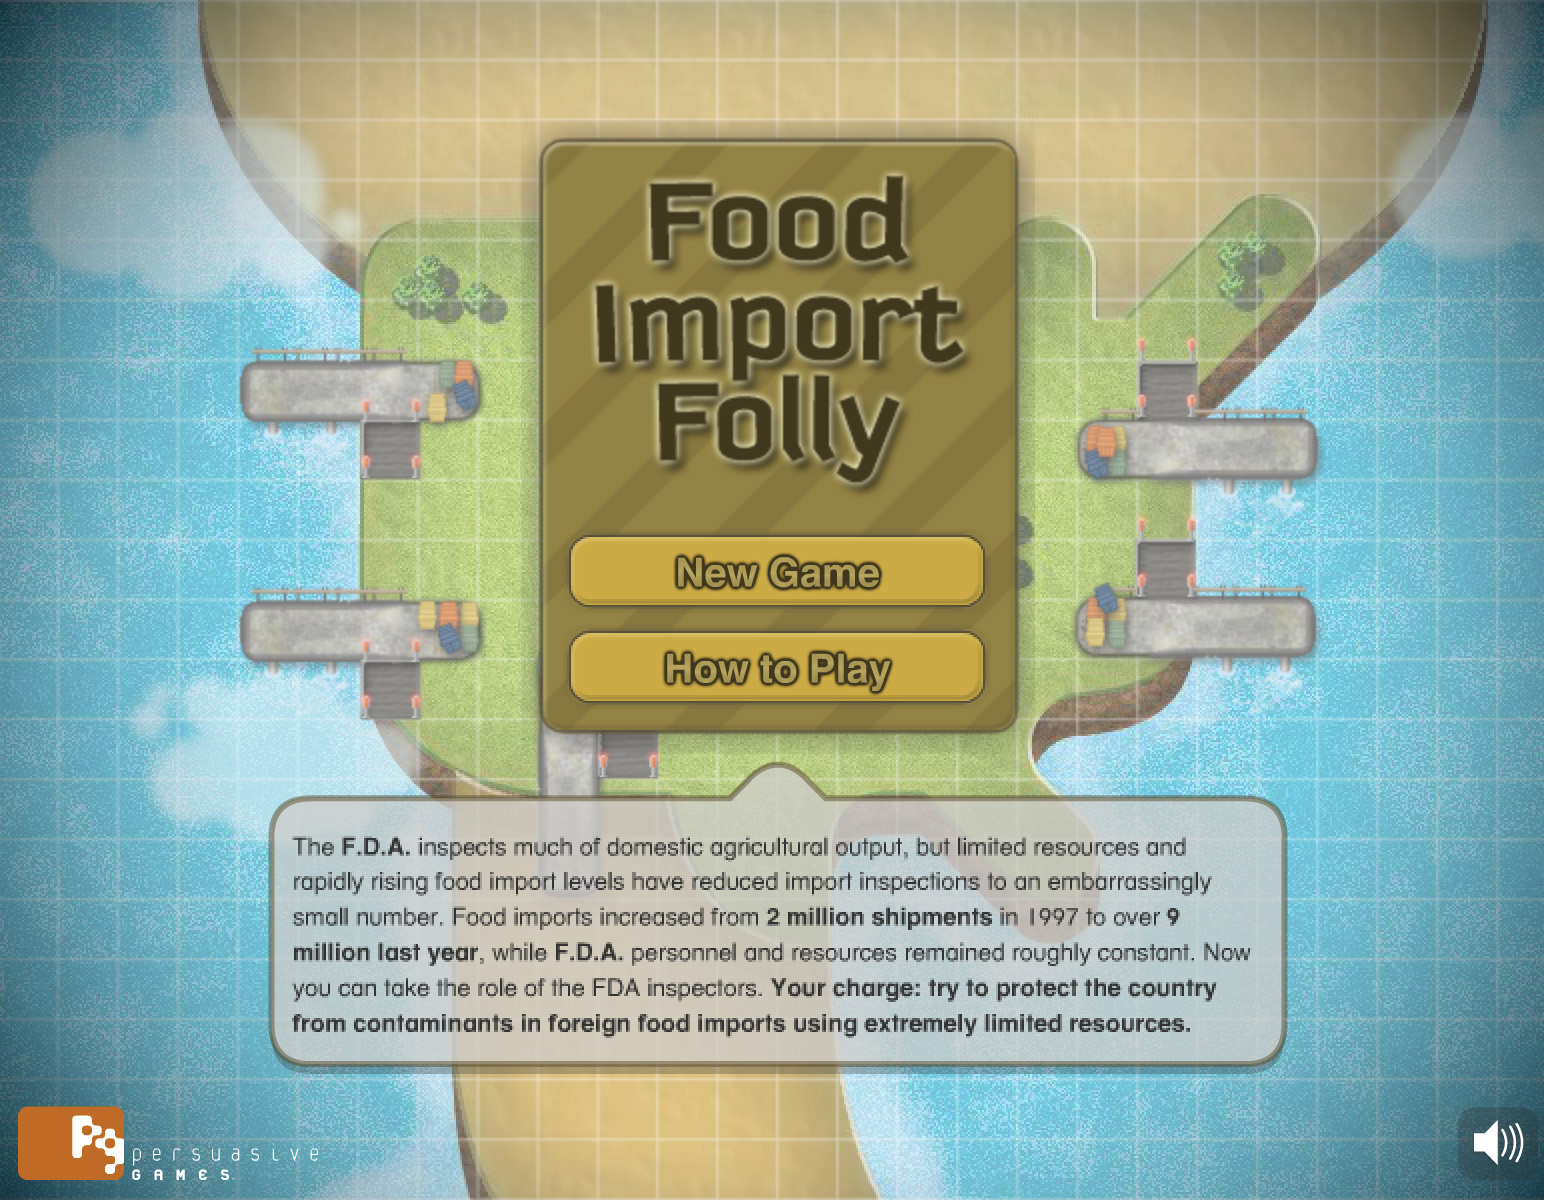 Try to protect the country from foreign contaminants in food imports using limited resources 